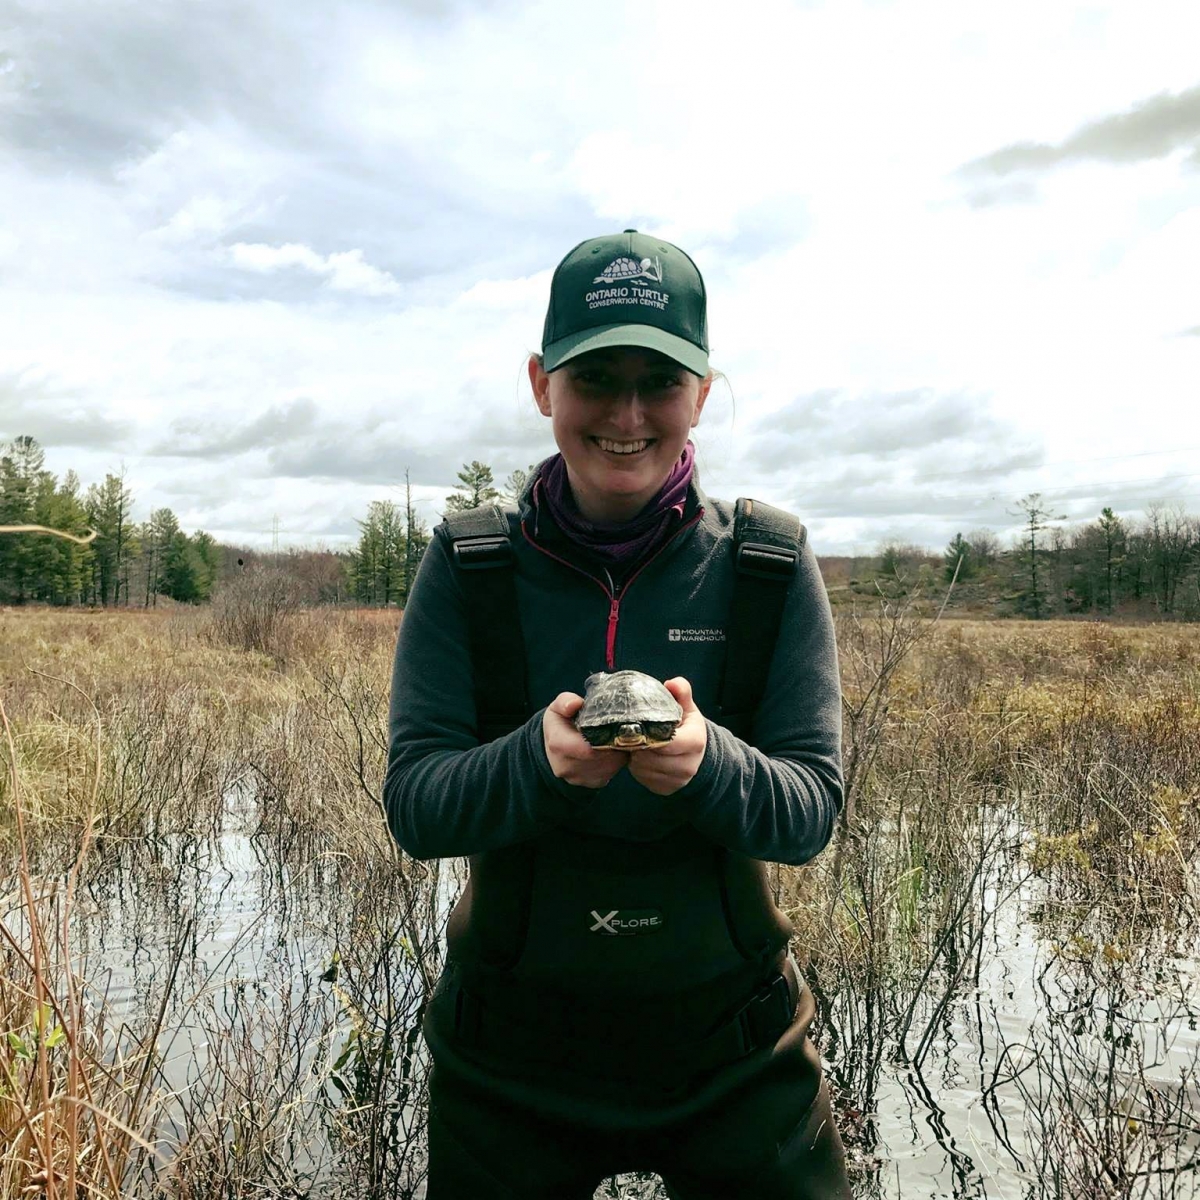 Researcher holding a Blanding's turtle with a tracker standing in a wetland.